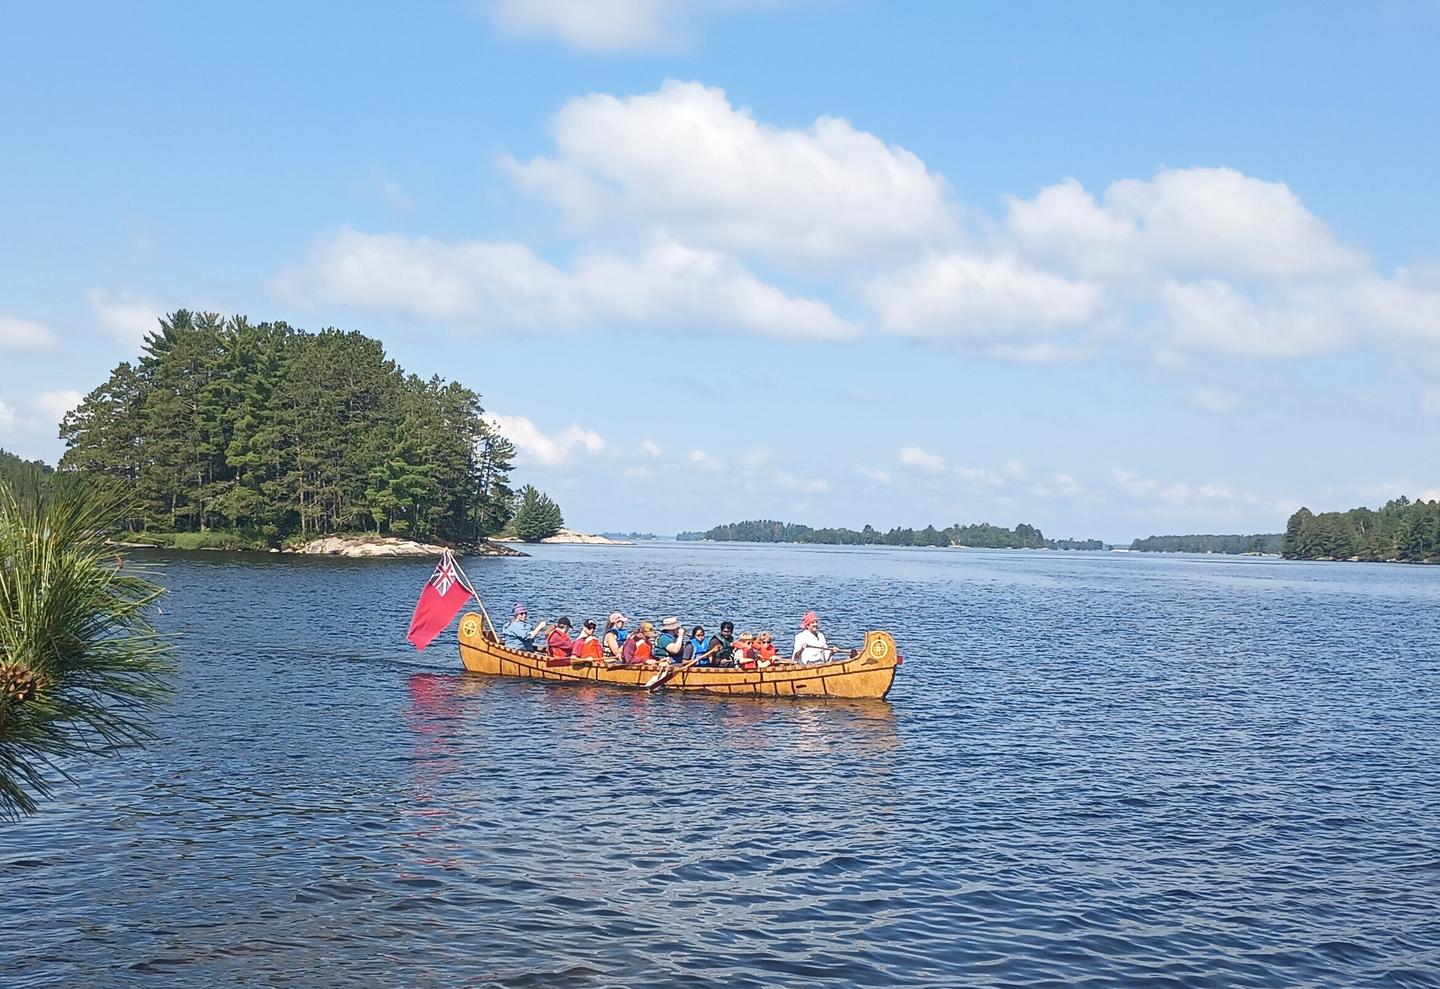 Park visitors paddle a 26-foot replica of a North Canoe